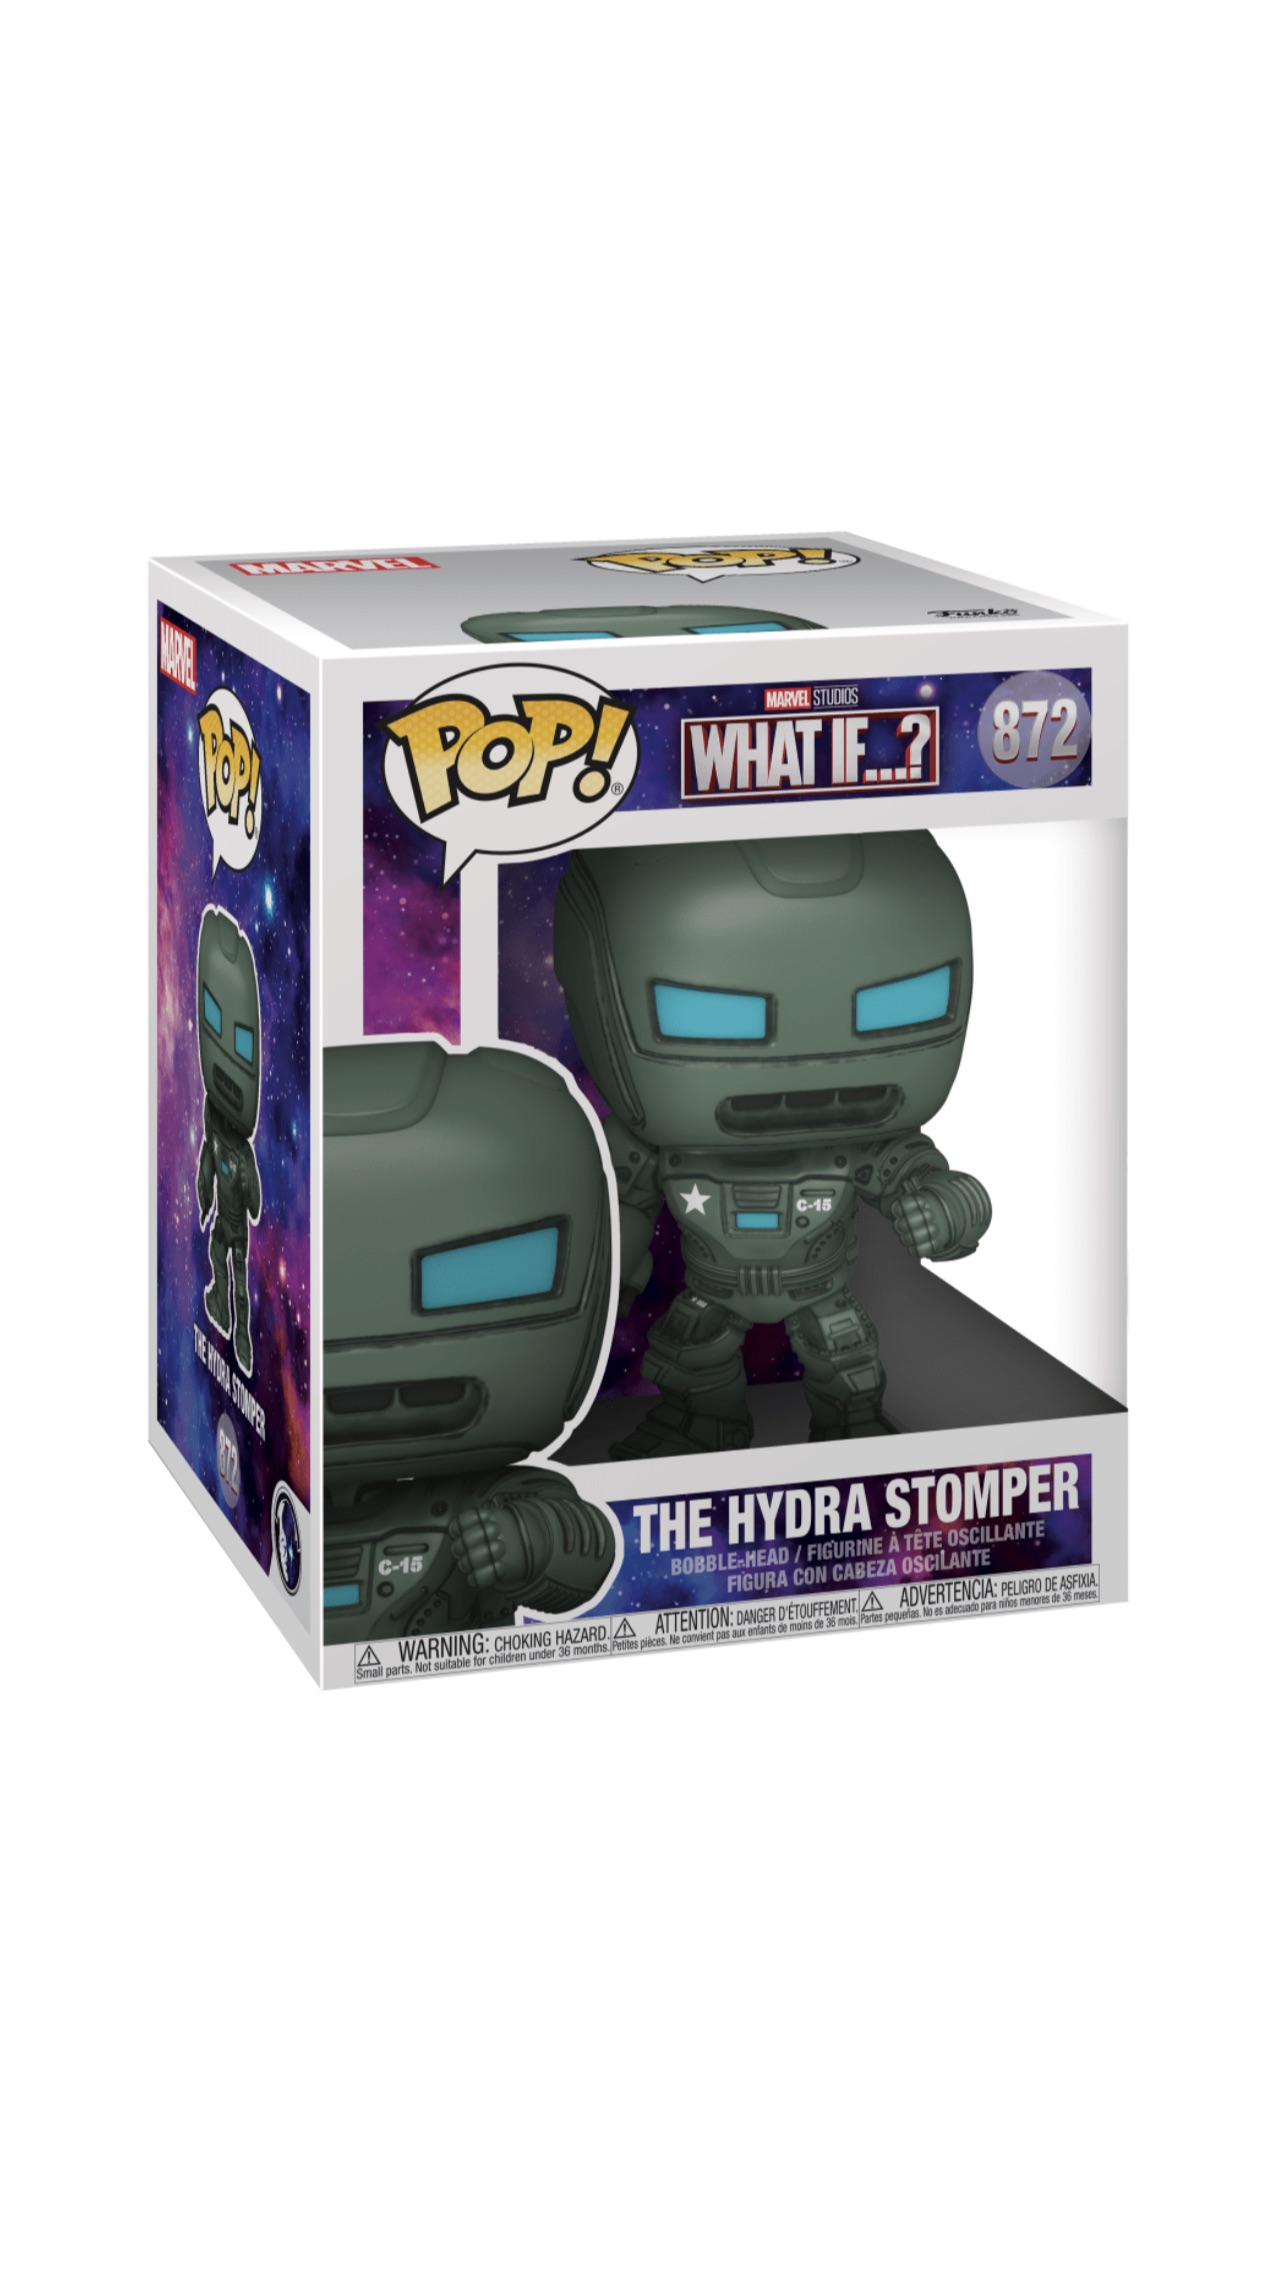 POP! Marvel What If? 6” The Hydra Stomper #872